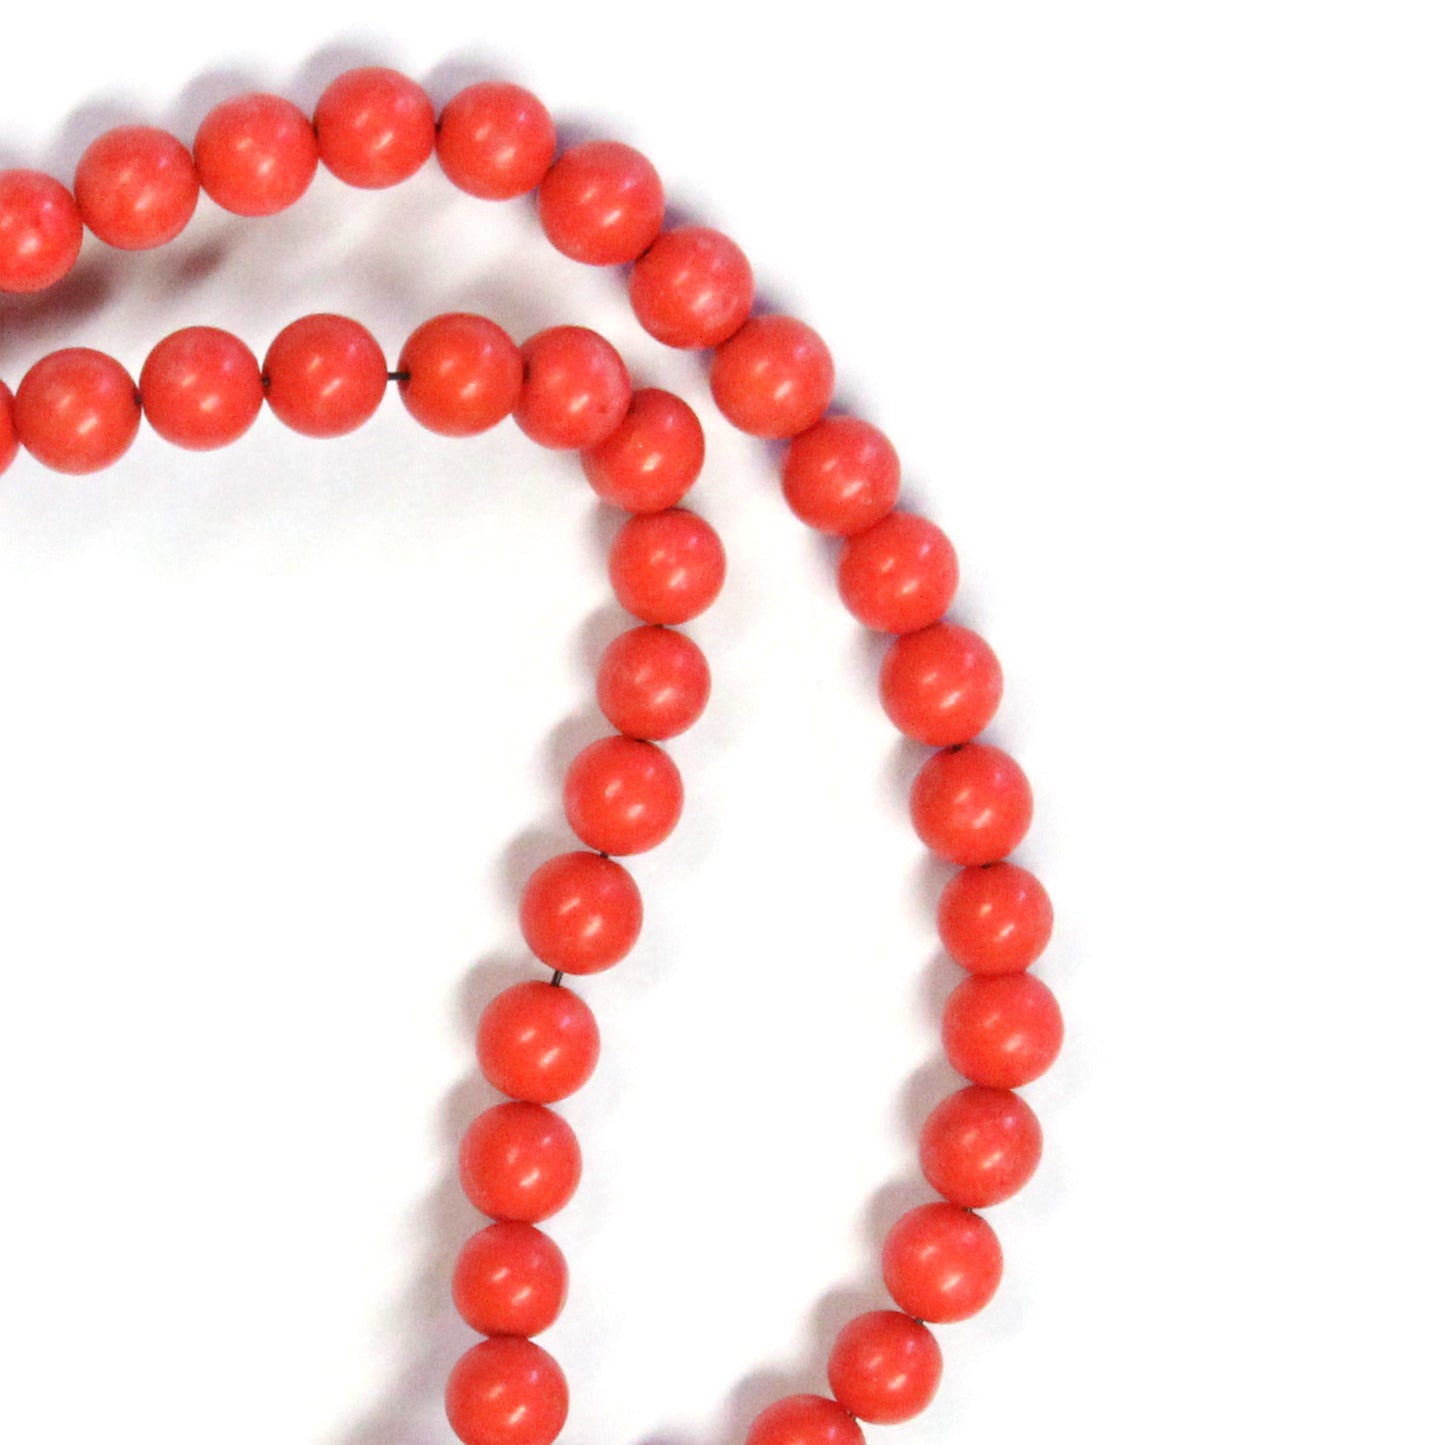 RED CORAL 4mm Round Beads / 16 Inch strand / reconstructed permanently dyed coral beads